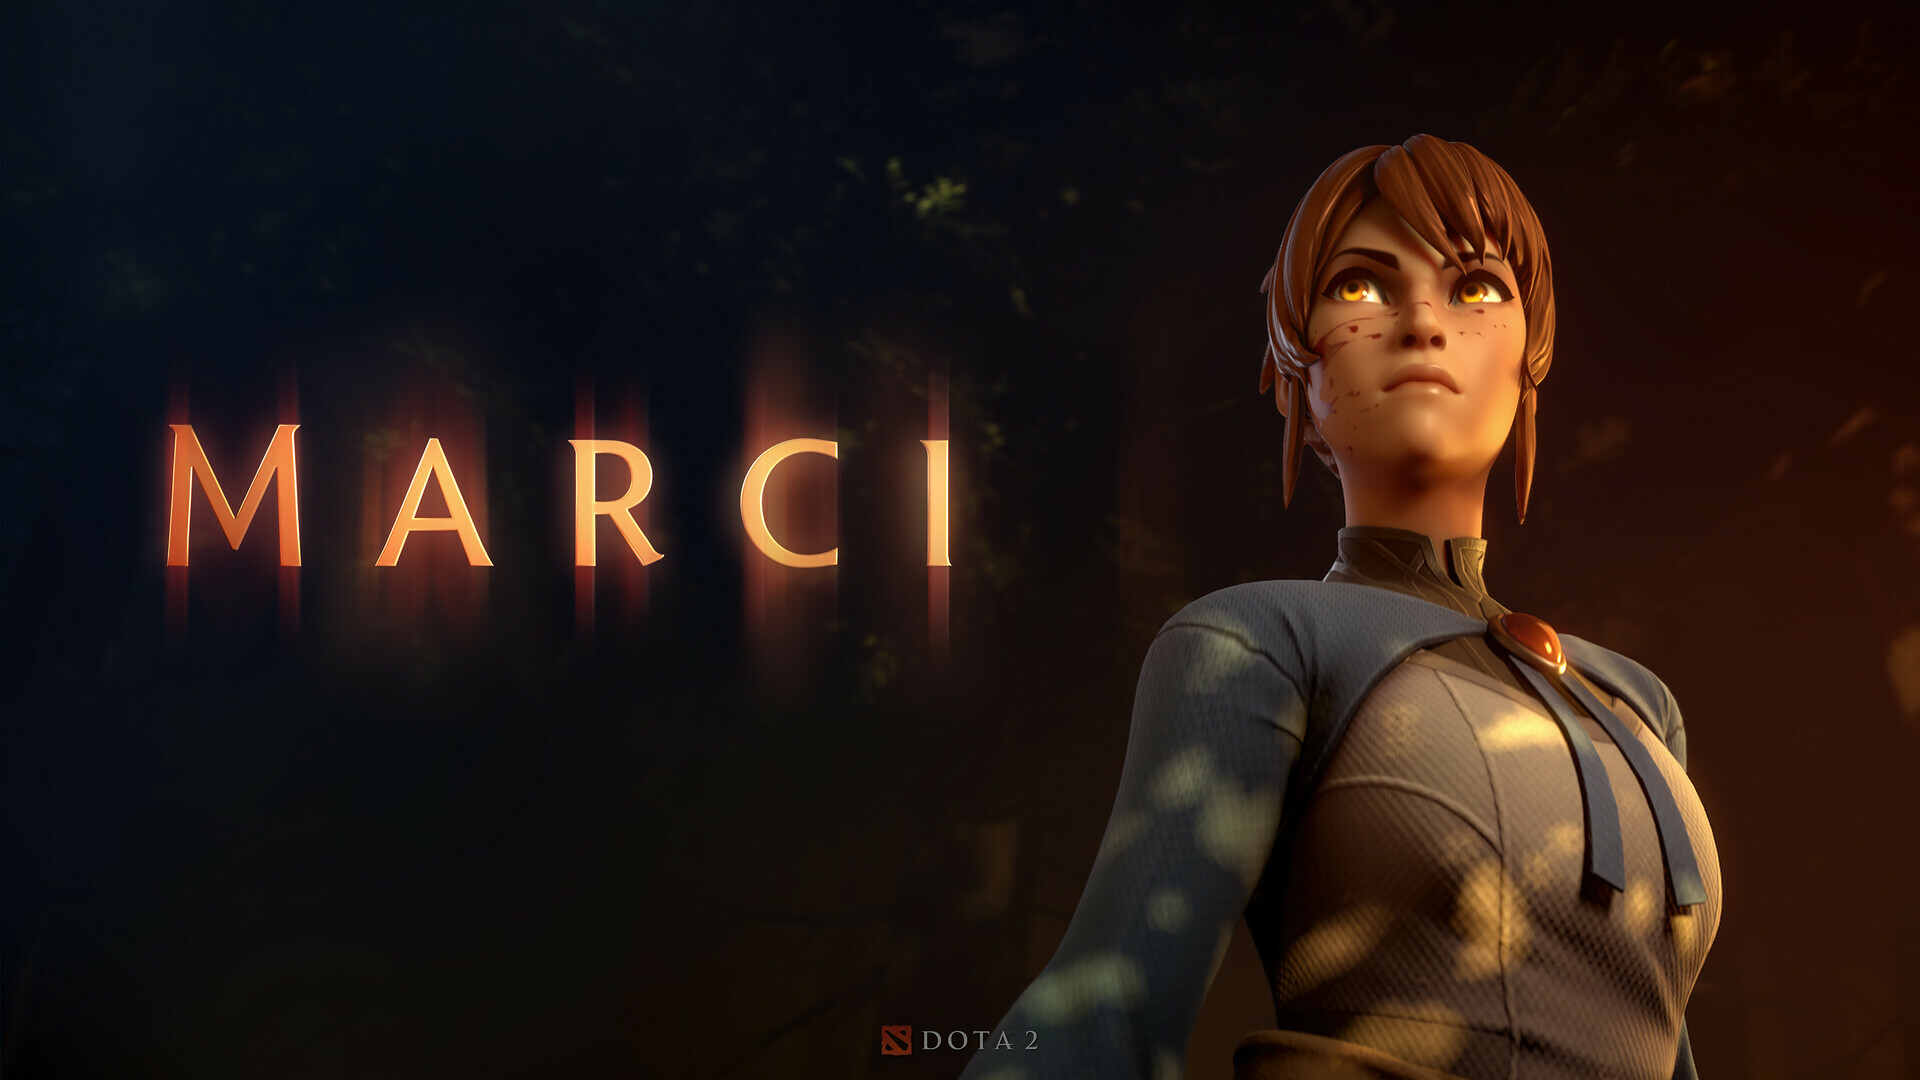 Dota 2: Marci, First debuted in the Dragon's Blood series. 1920x1080 Full HD Wallpaper.